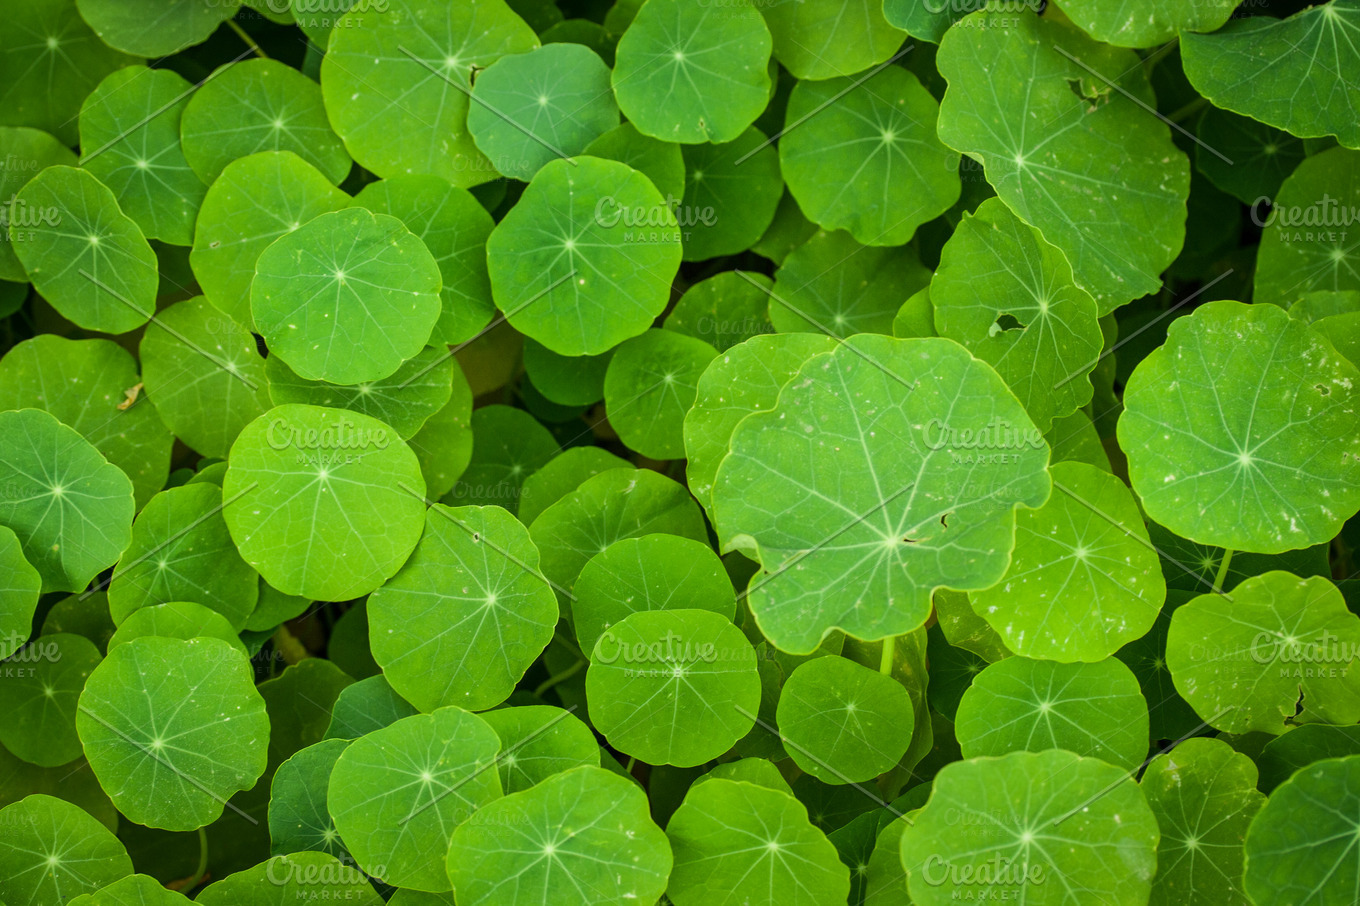 Green Round Leaves ~ Nature Photos ~ Creative Market